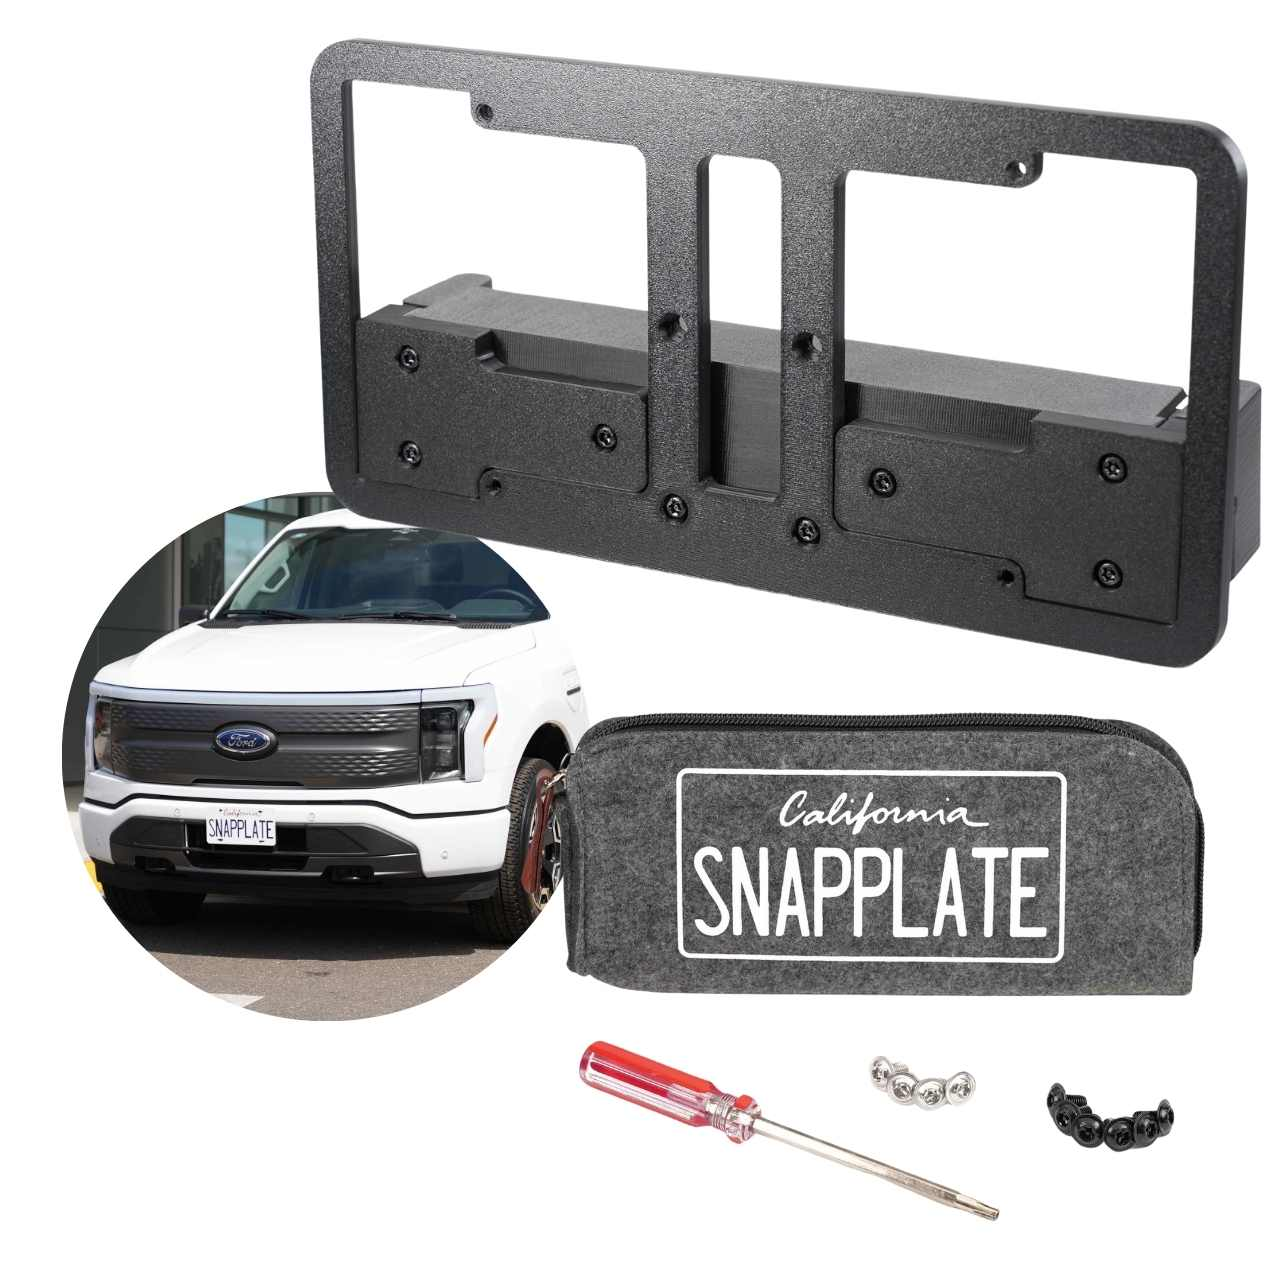 SnapPlate No-drill License Plate Bracket for Ford F-150 Lightning EV